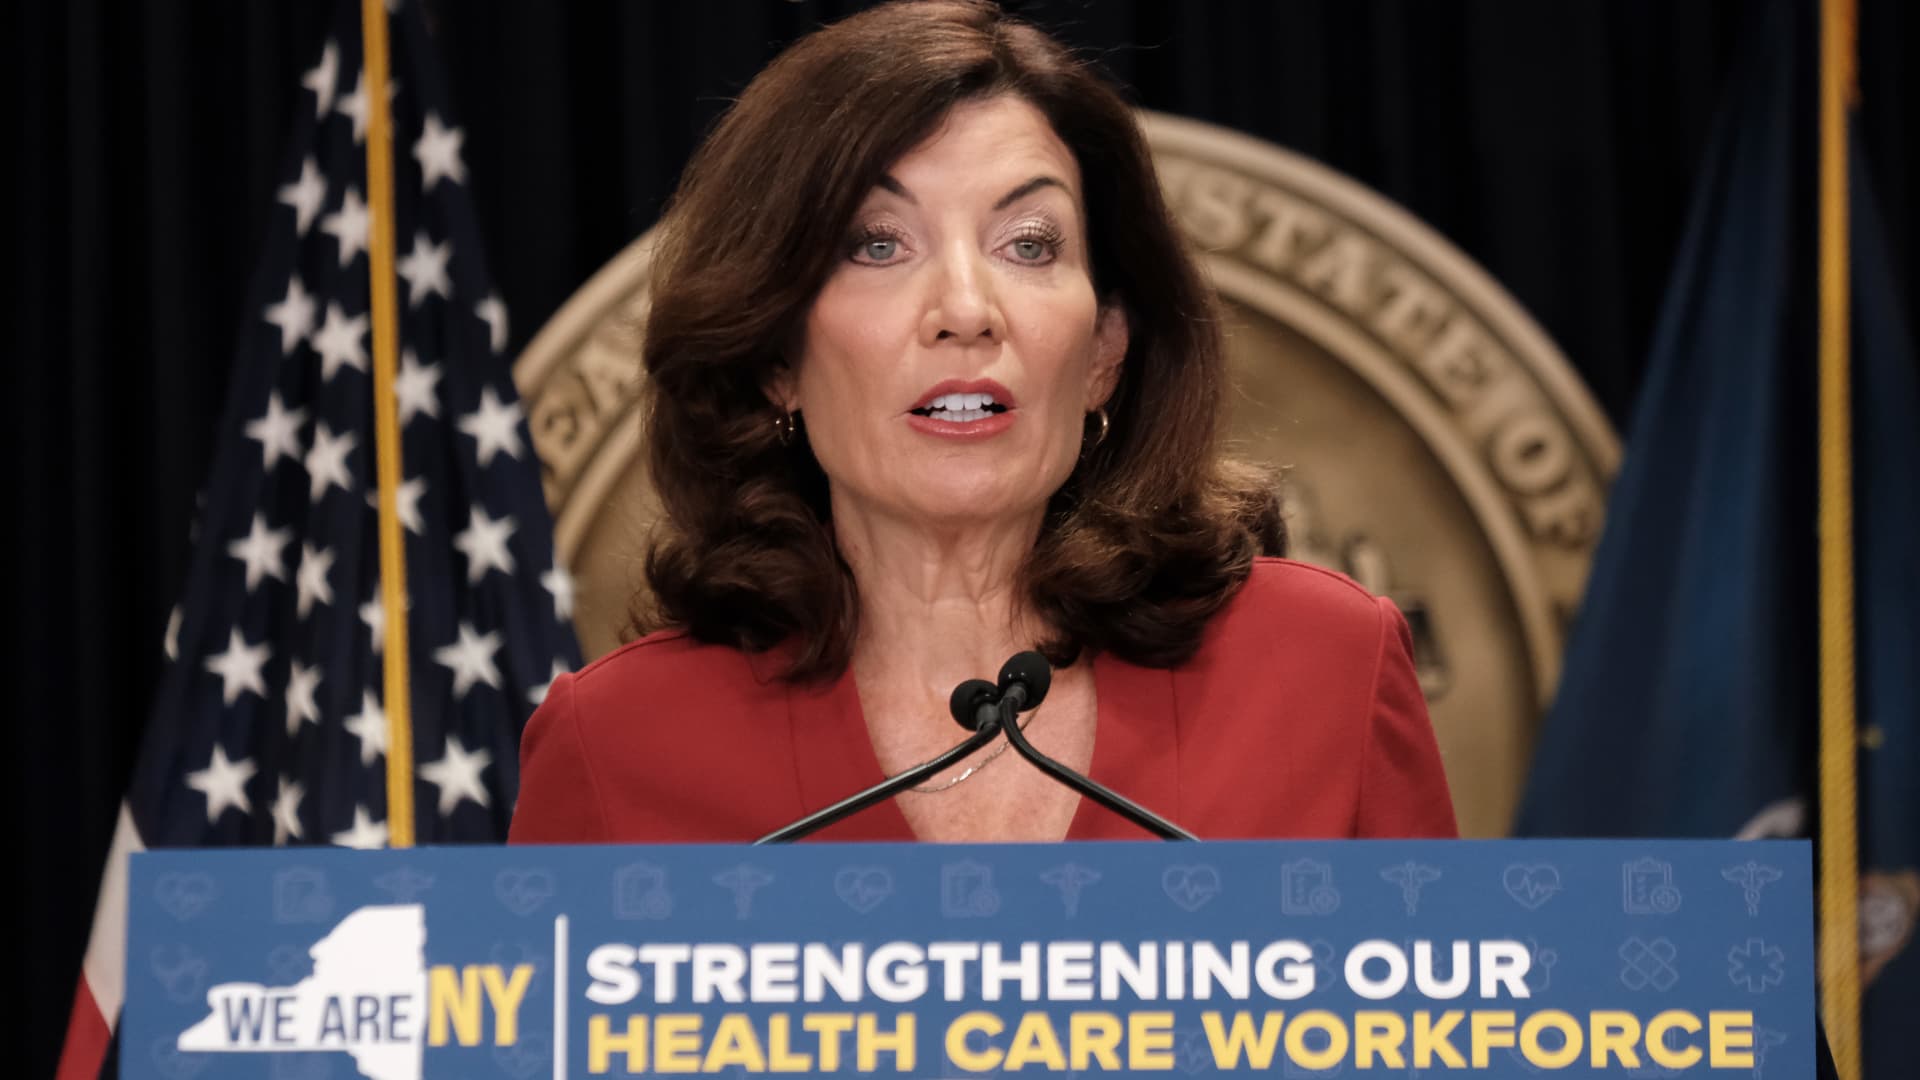 New York Governor Kathy Hochul speaks at a news conference on August 03, 2022 in New York City.